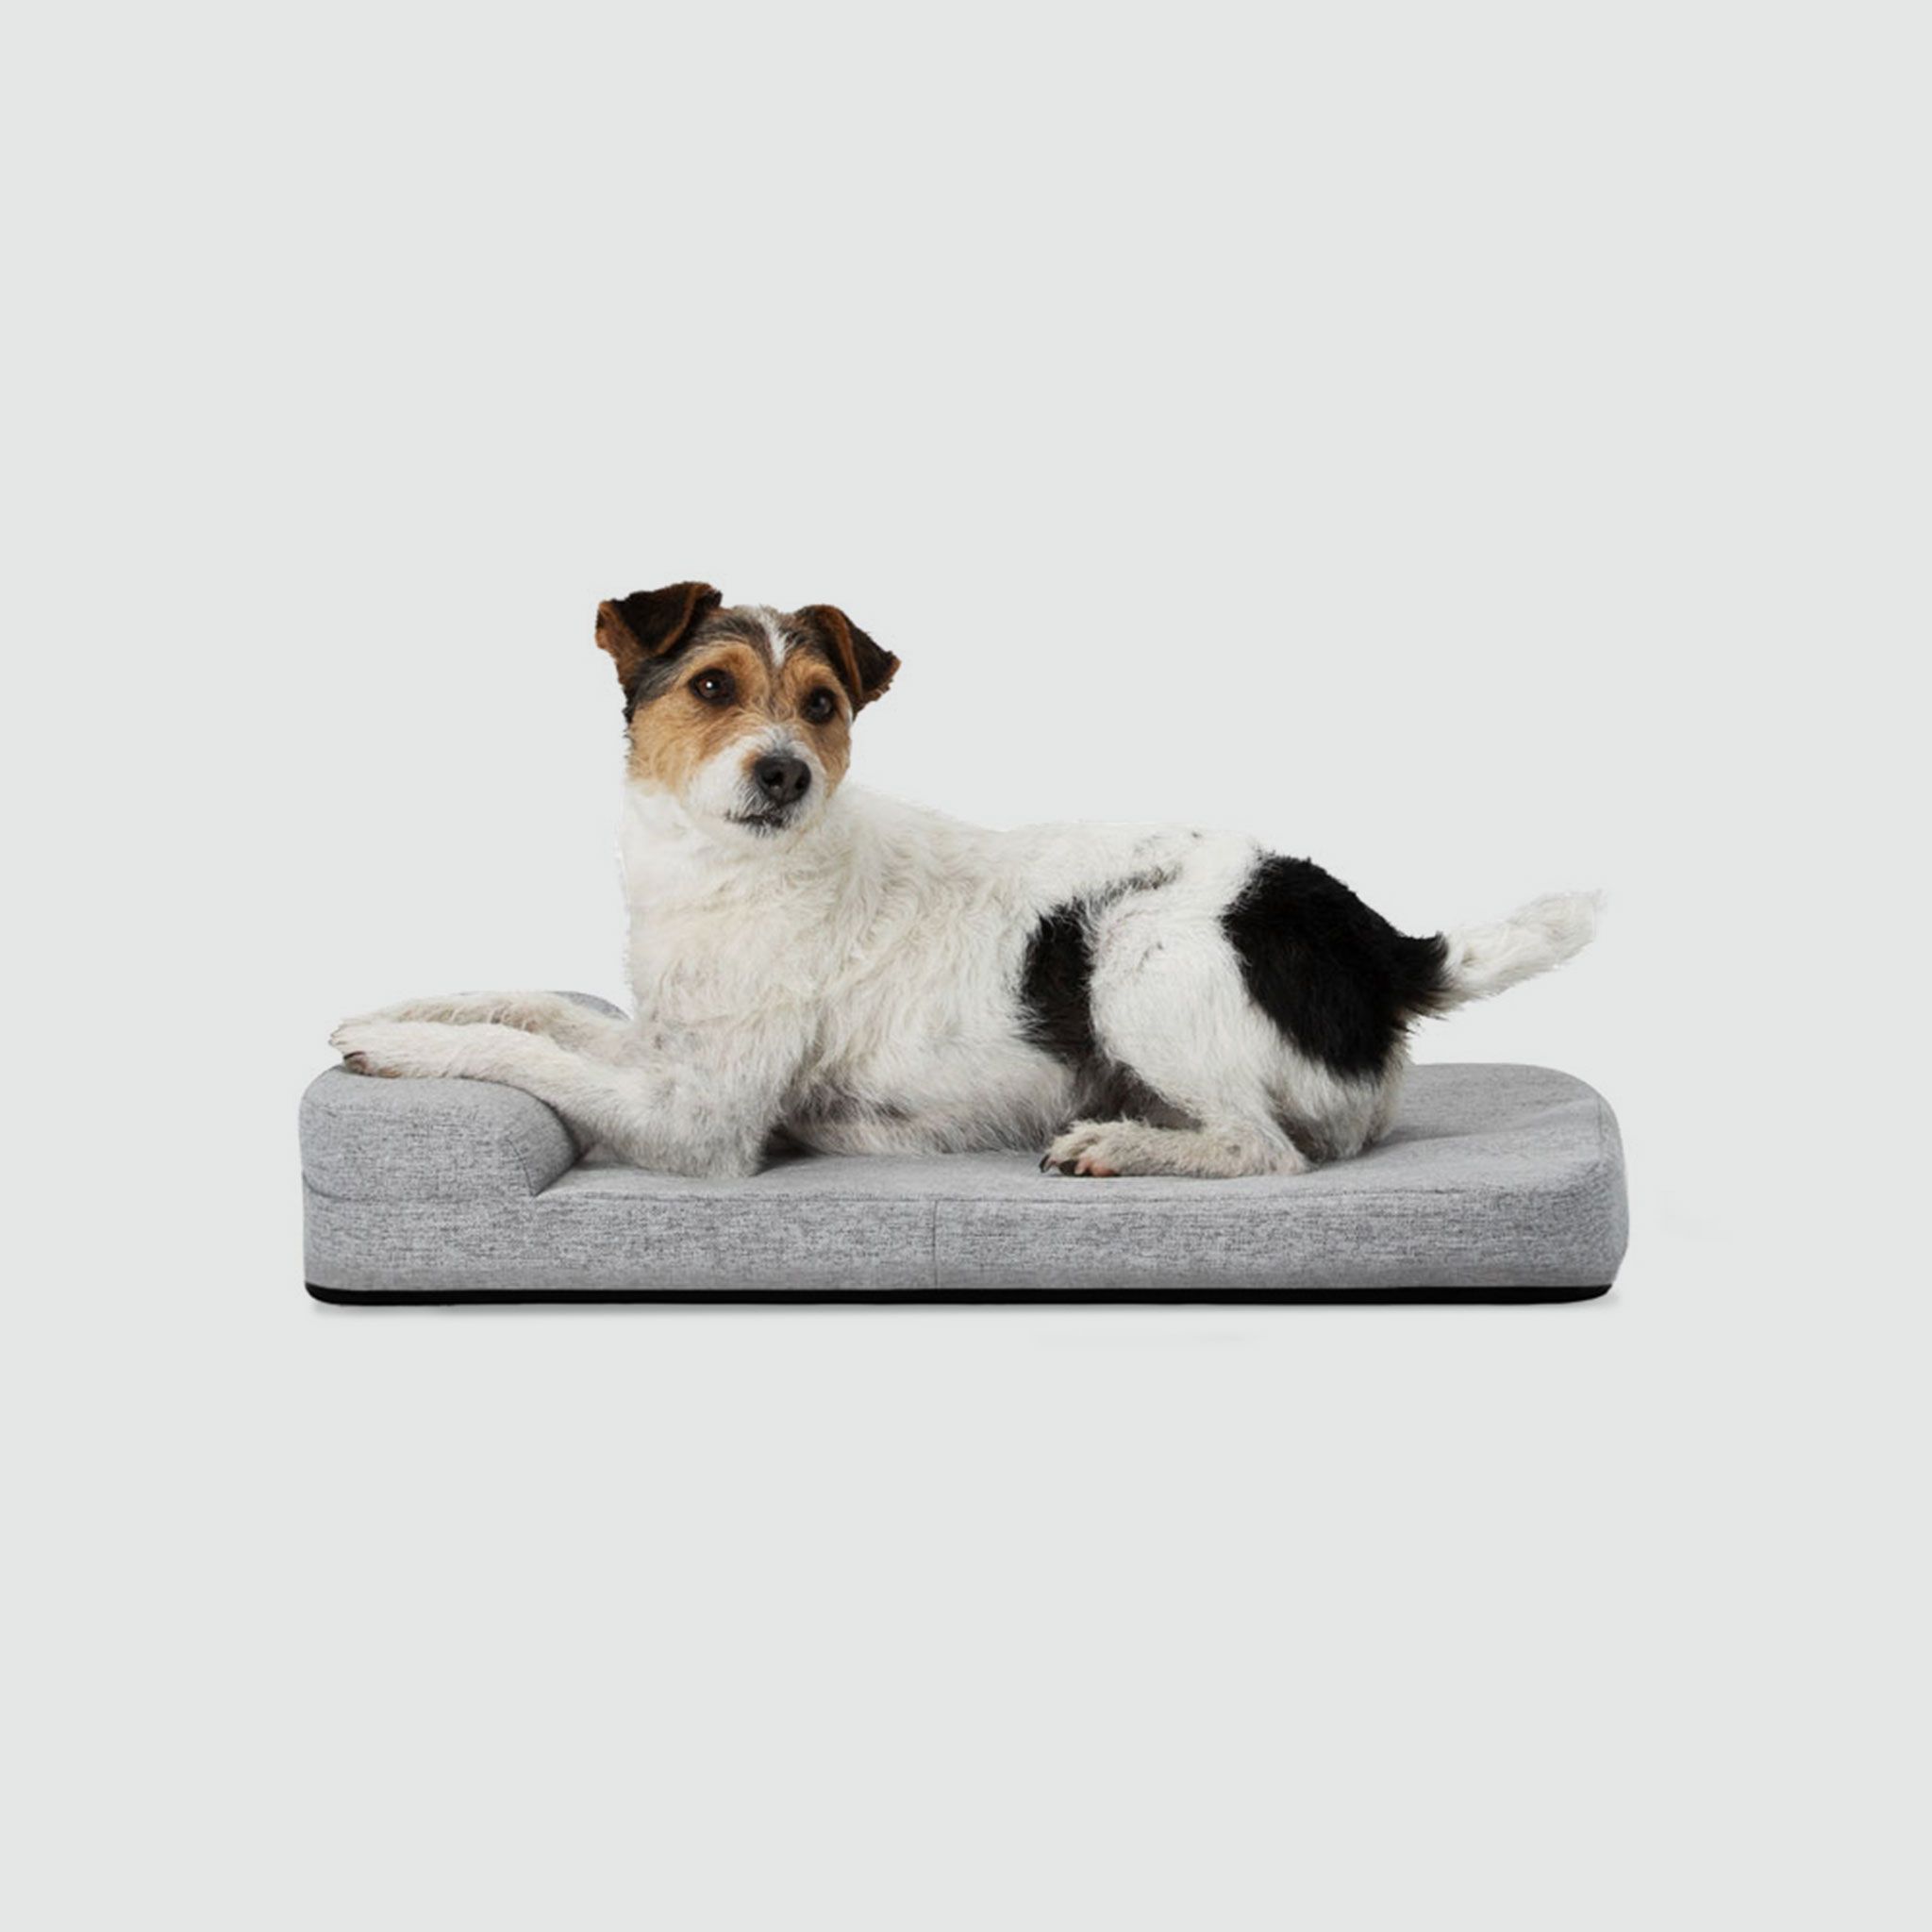 A dog laying on top of a dog bed